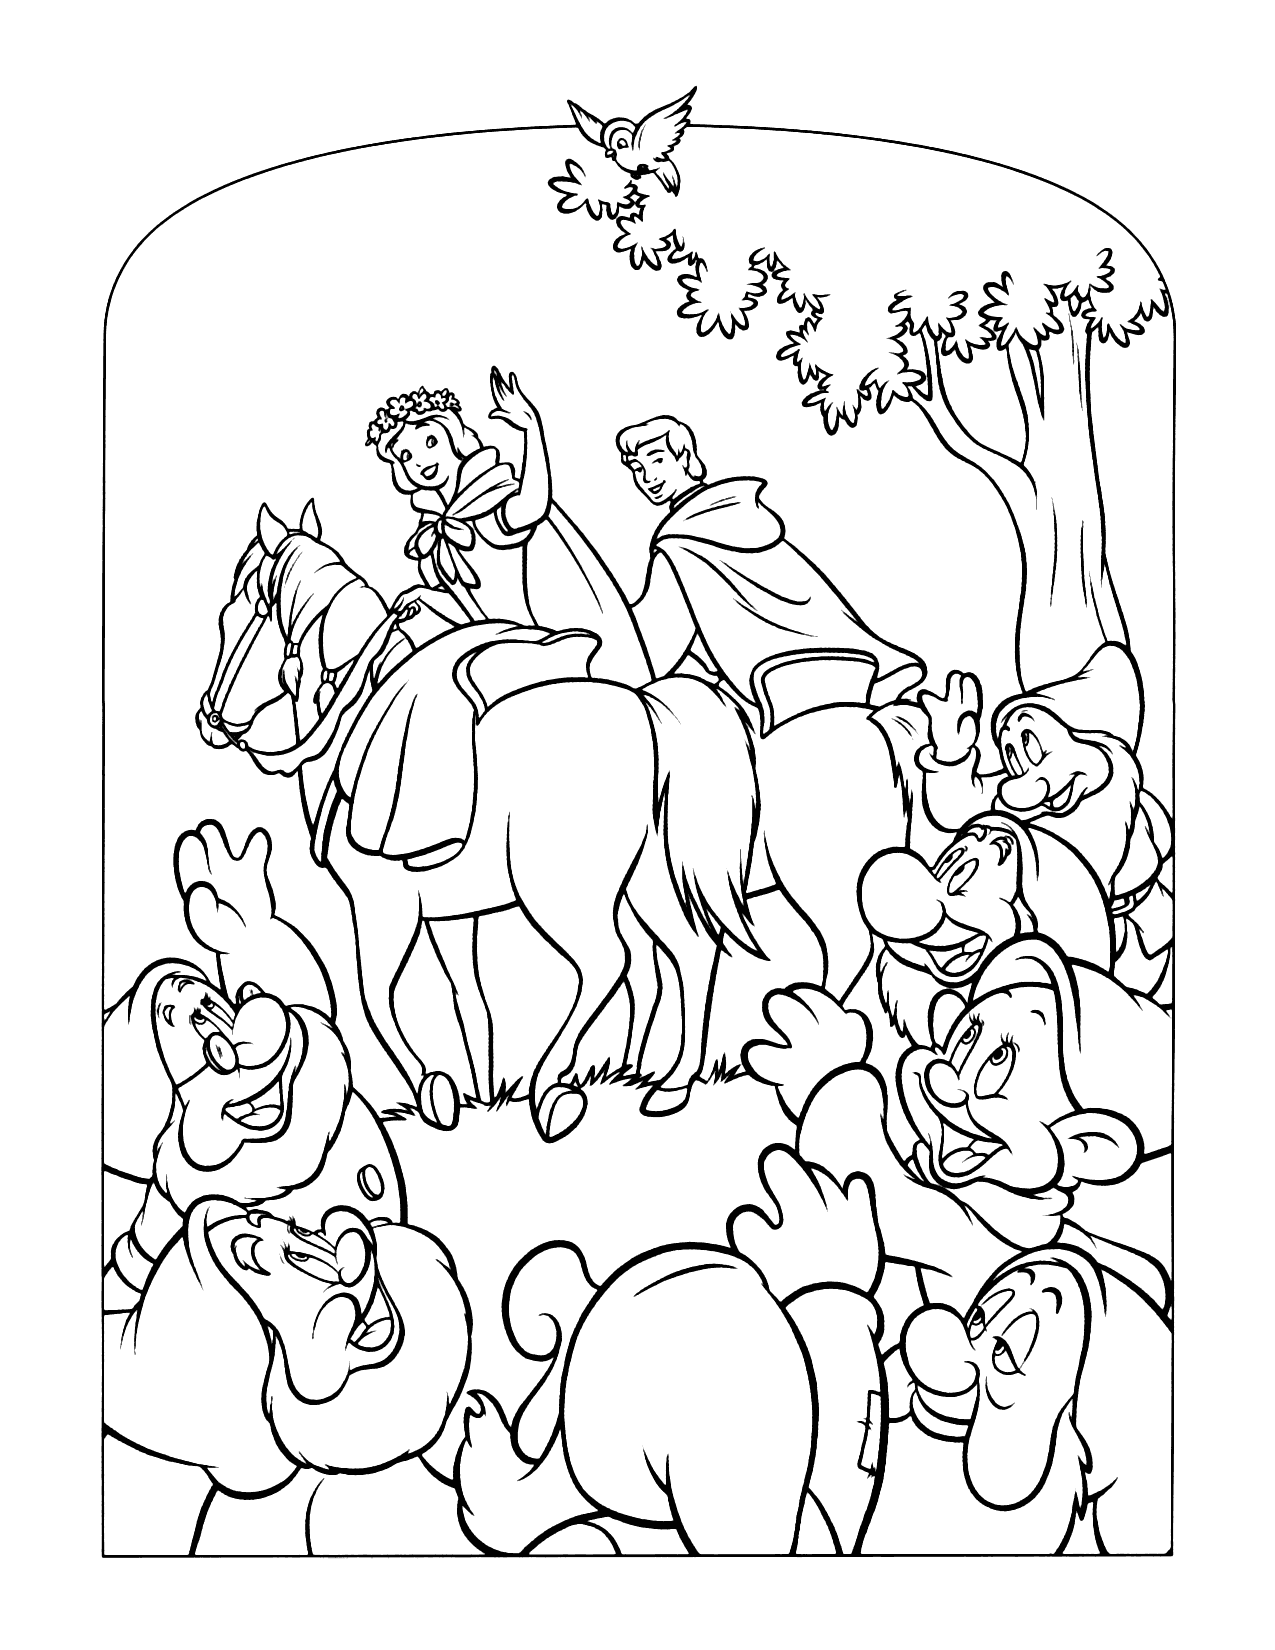 Snow White And The Prince Ride Off To Their Happy Ending Coloring Page